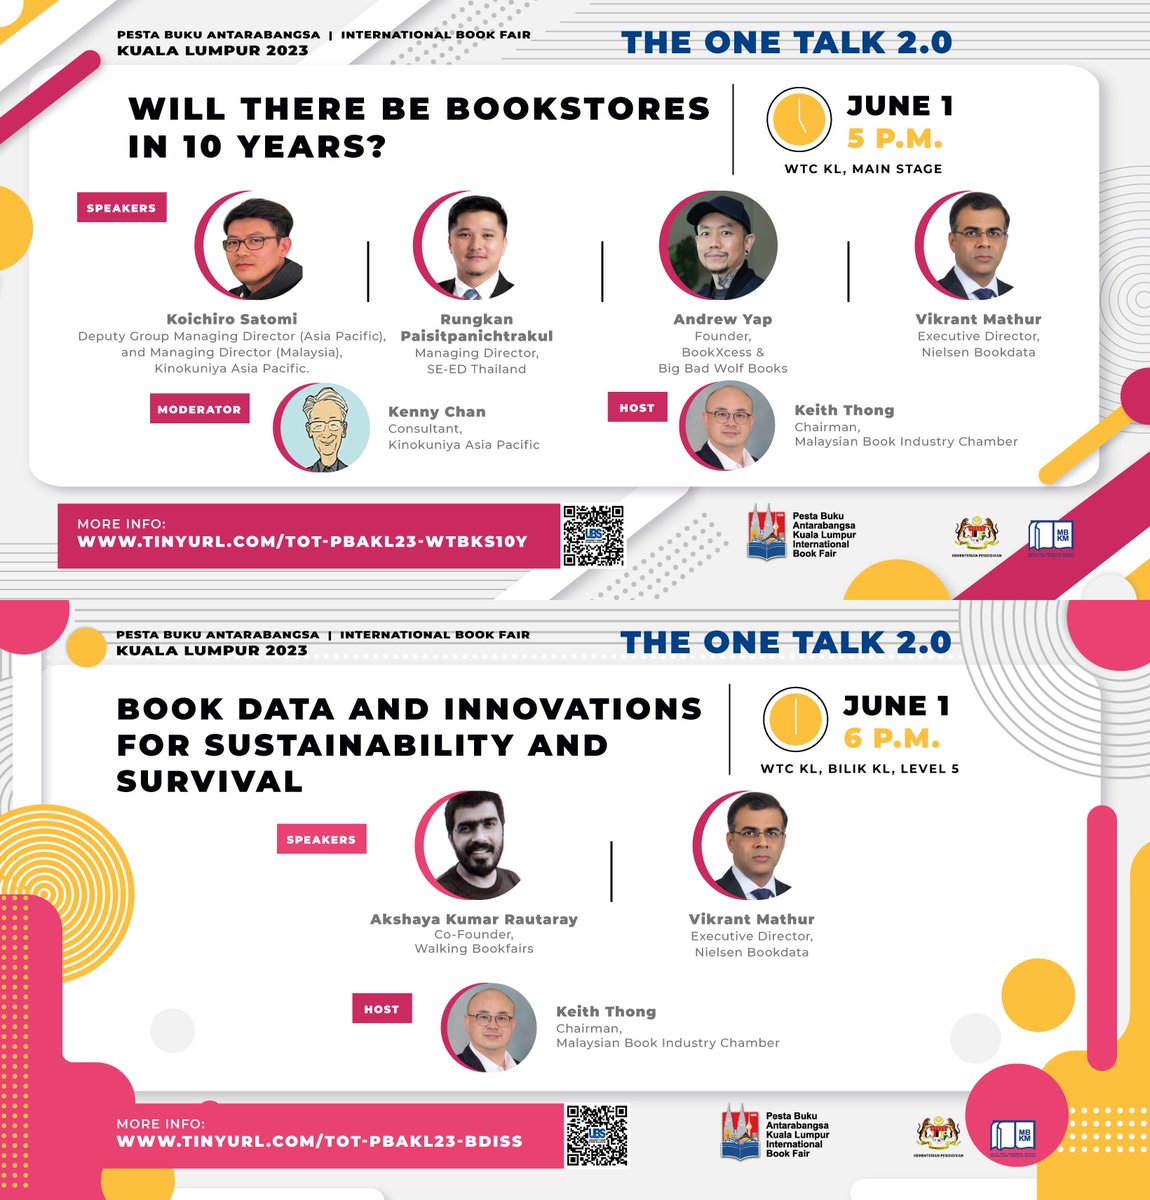 The One Talk will bring together leaders in publishing, bookselling, bookfairs and events, libraries, the World Book Capital, and employability. Our Executive Director of Nielsen BookData India, Vikrant Mathur, will be speaking. tinyurl.com/tot-pbakl23-wt… tinyurl.com/tot-pbakl23-bd…